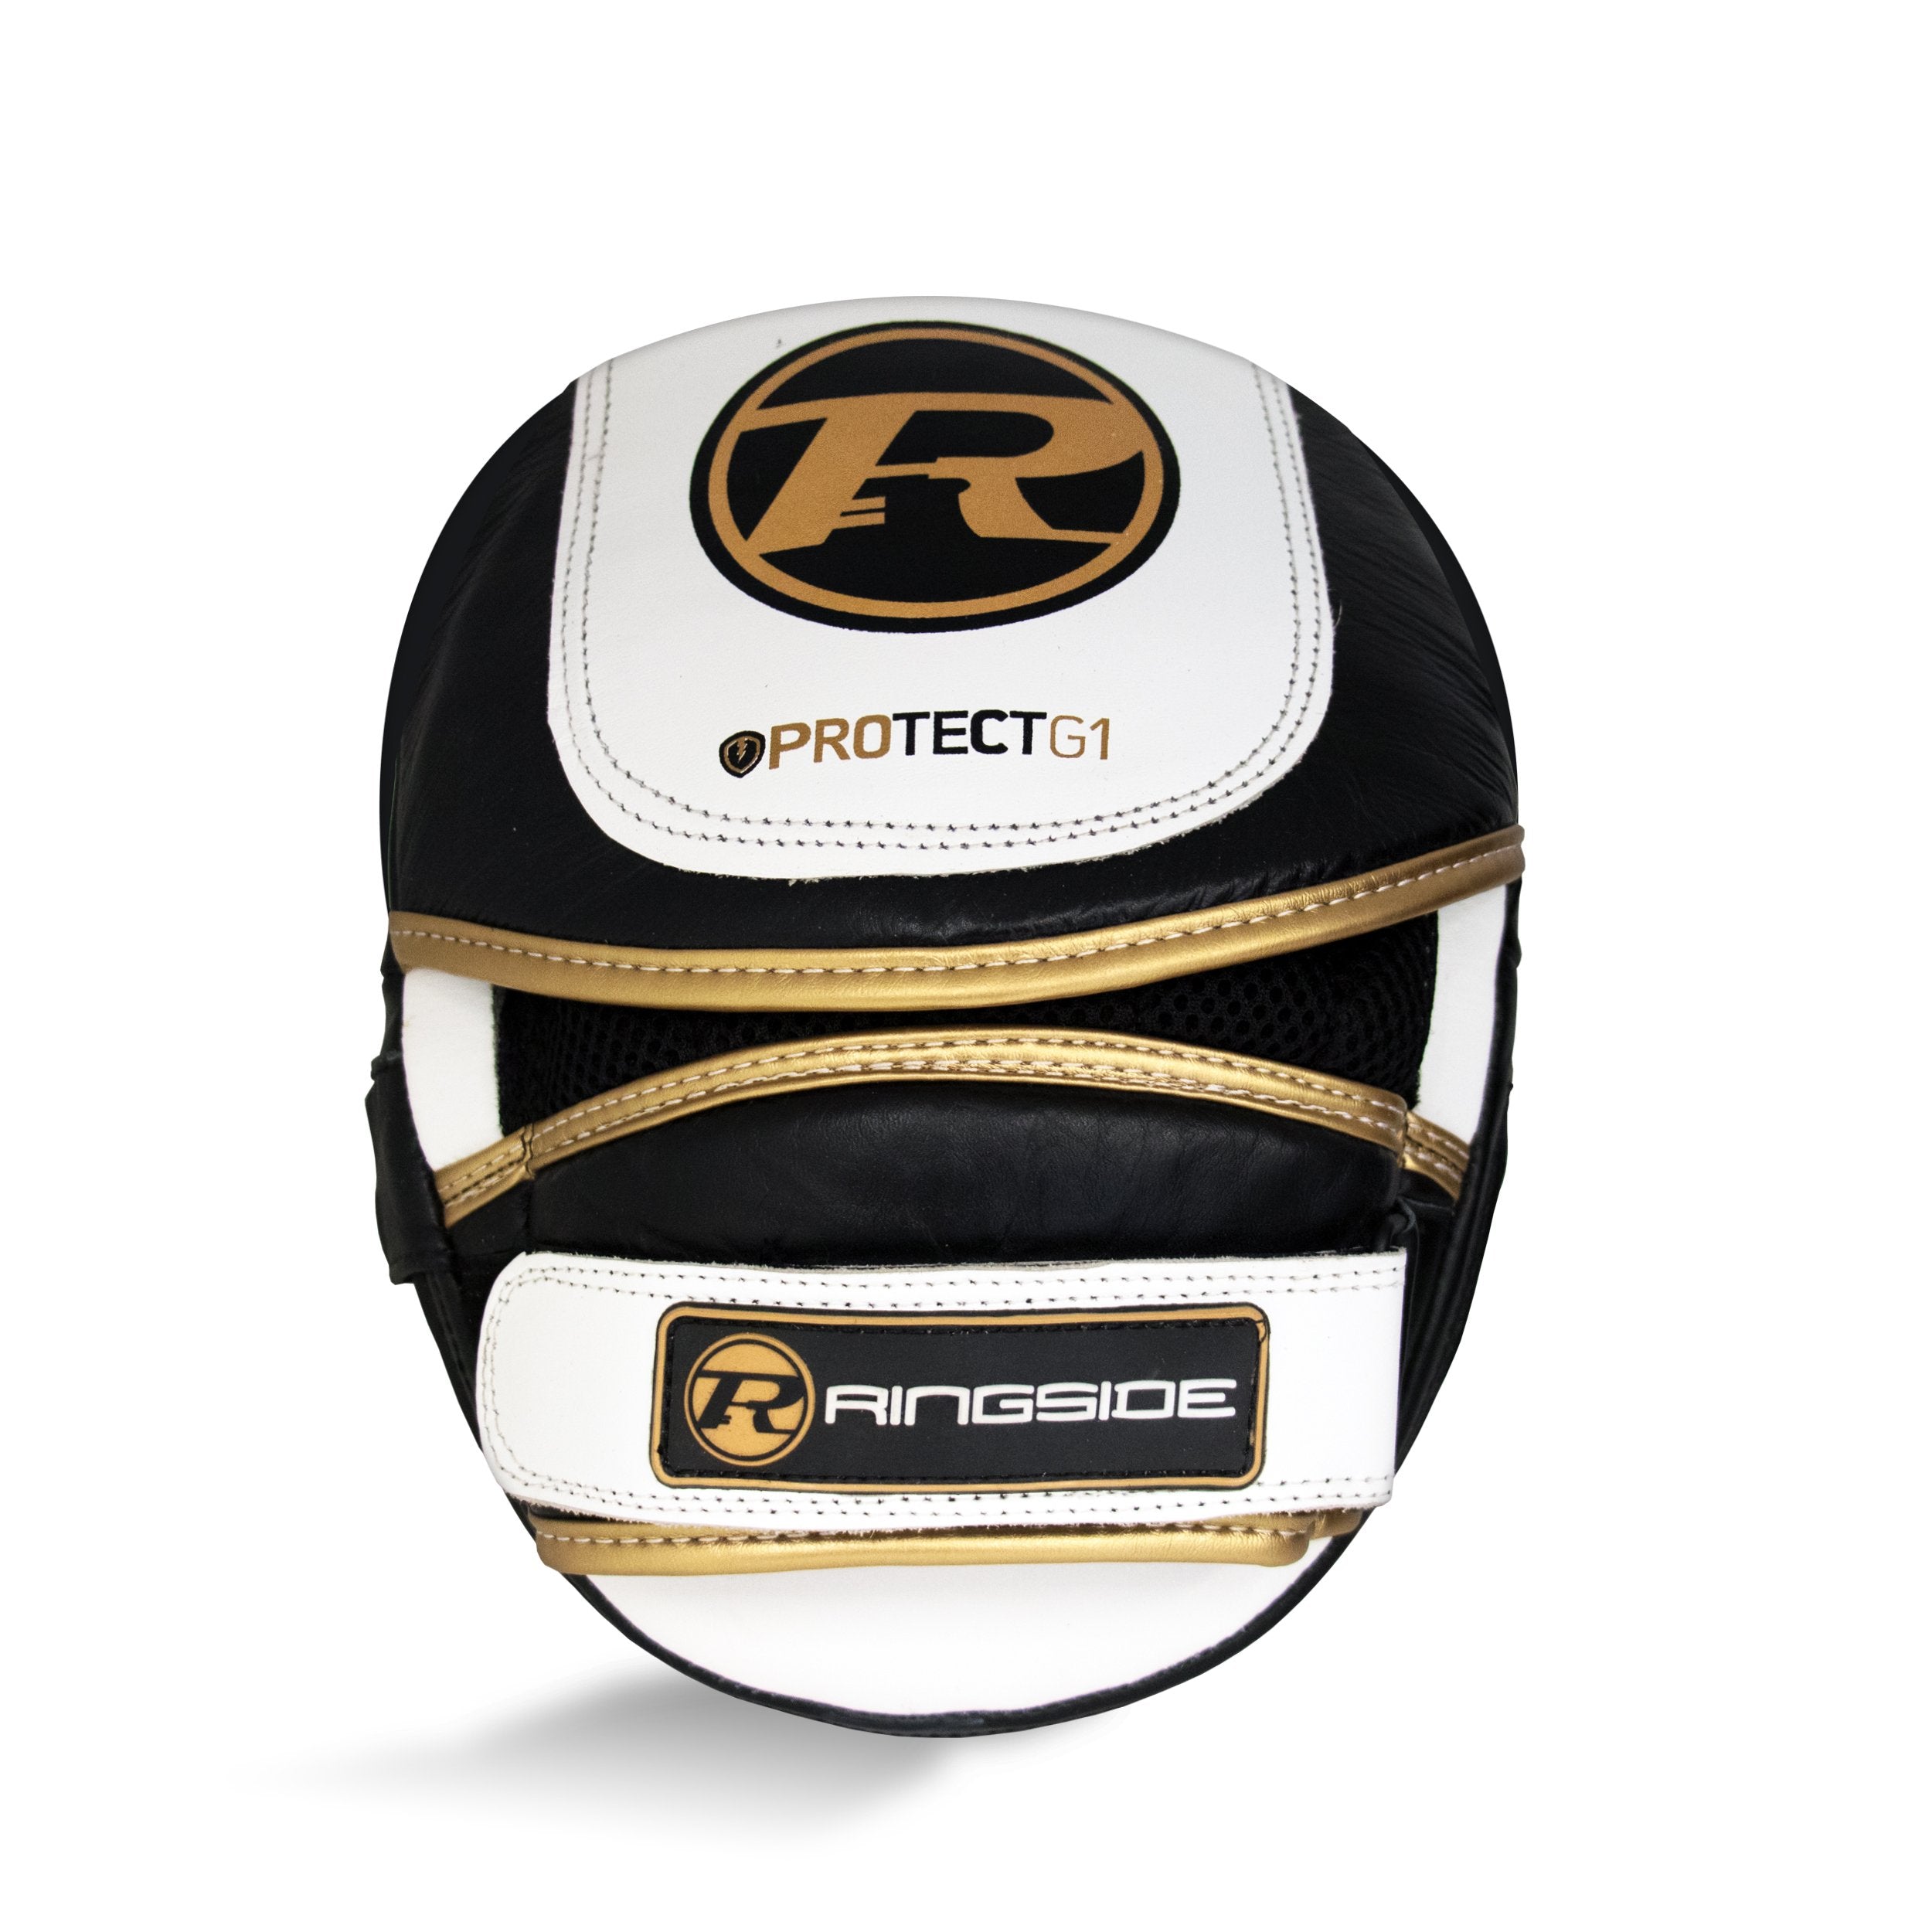 Protect G1 Focus Pads White / Black / Gold